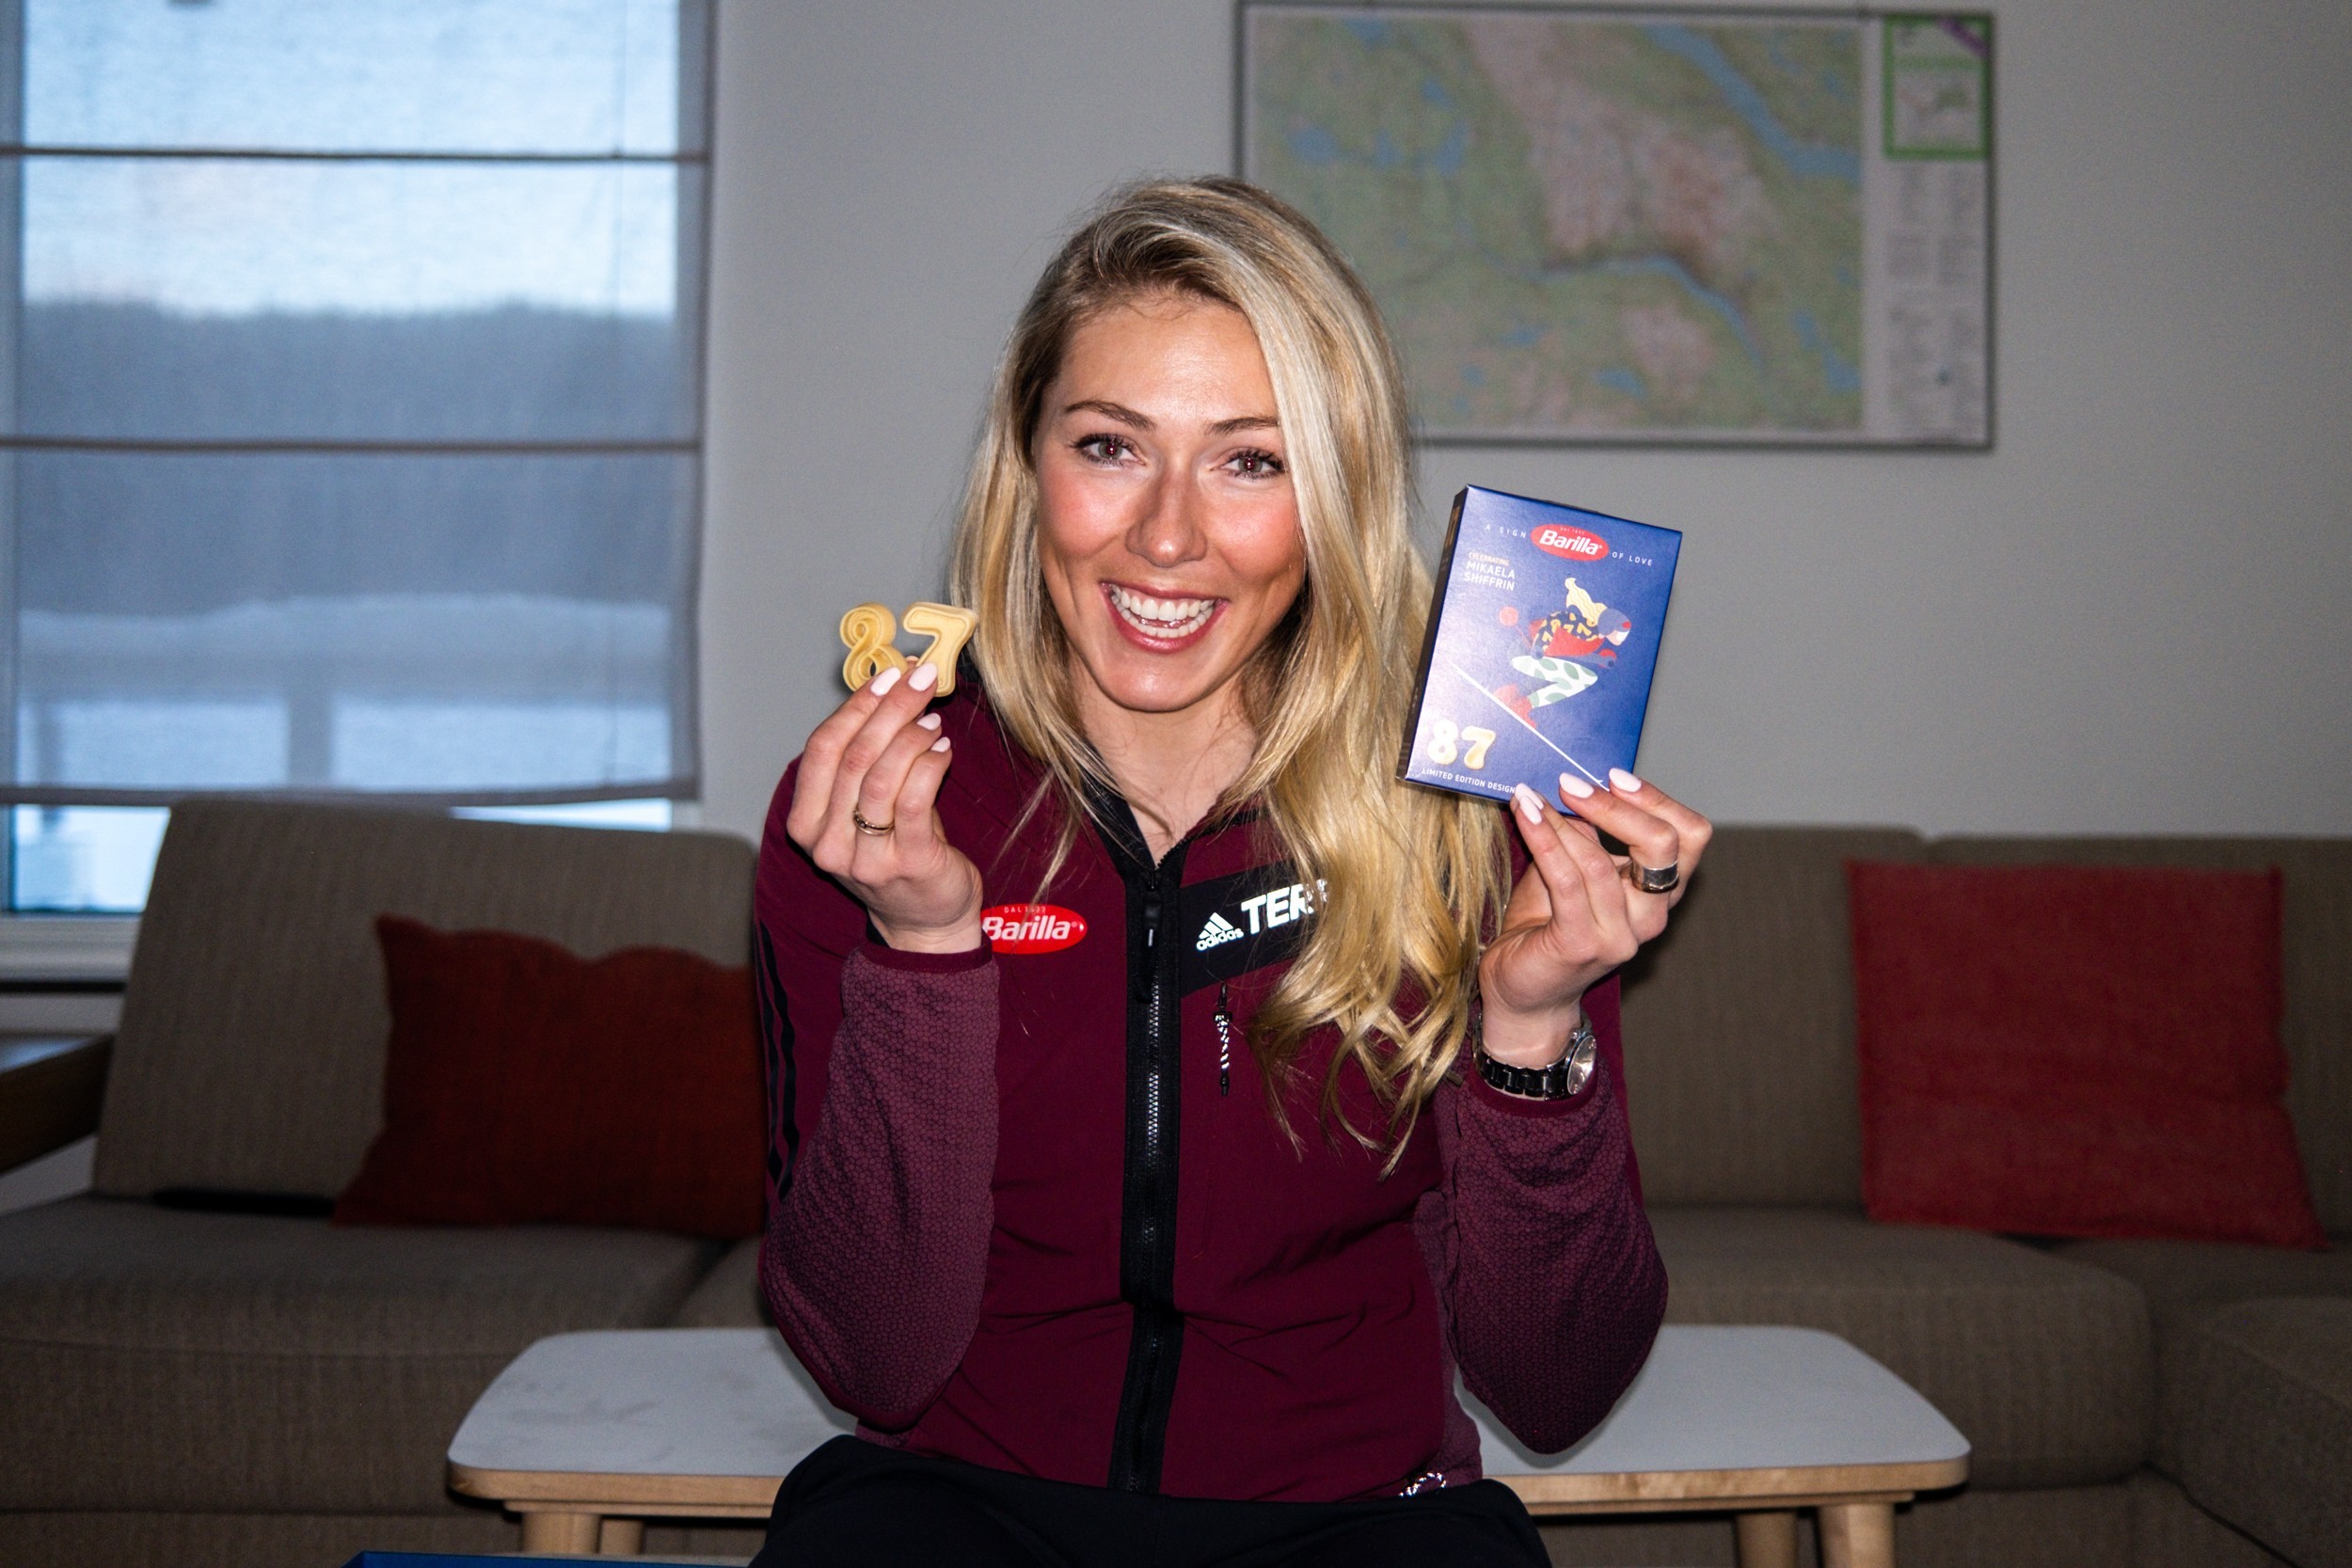 Barilla & Mikaela Shiffrin: Greatness starts with a great recipe - Pack No. 52